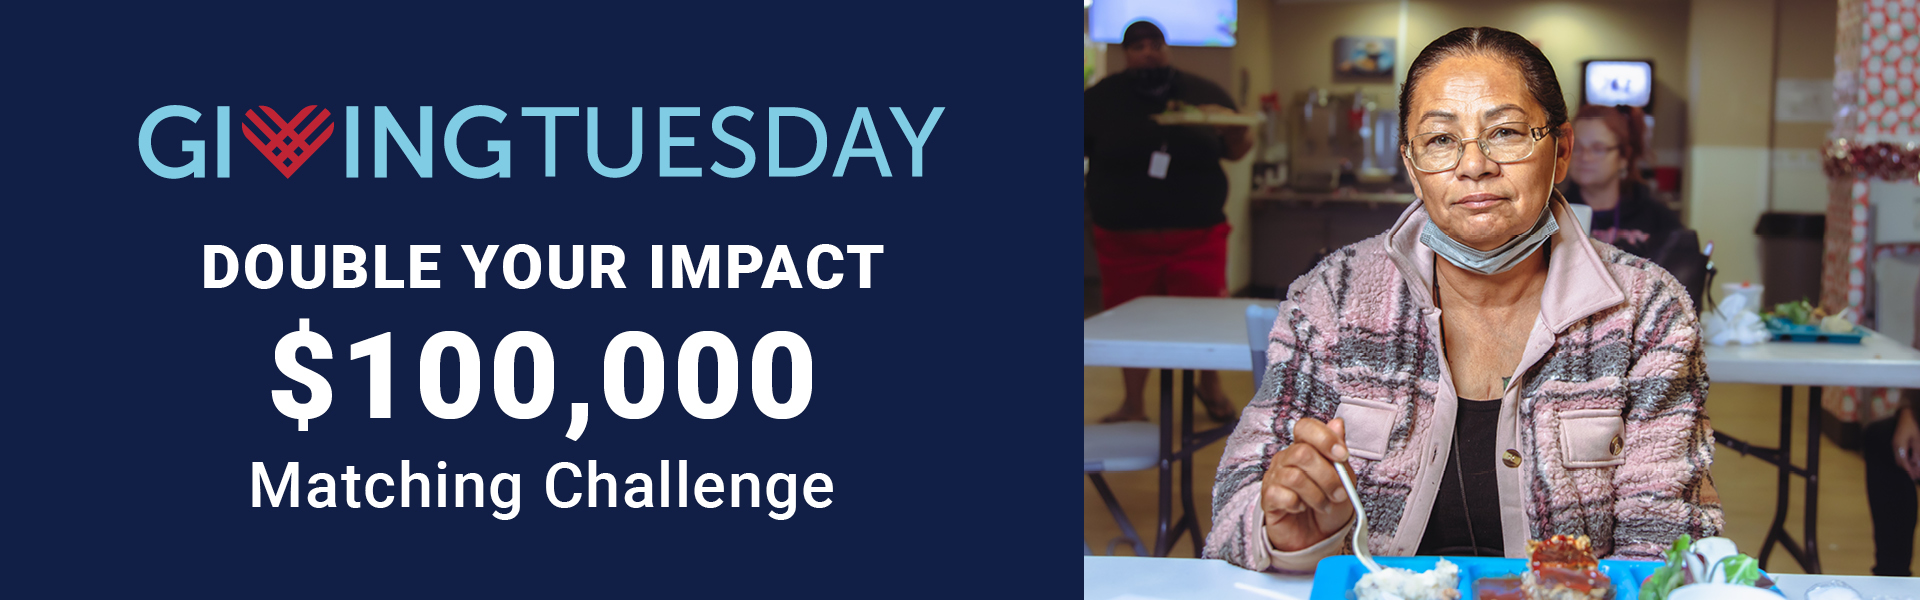 Double your Impact this Giving Tuesday!